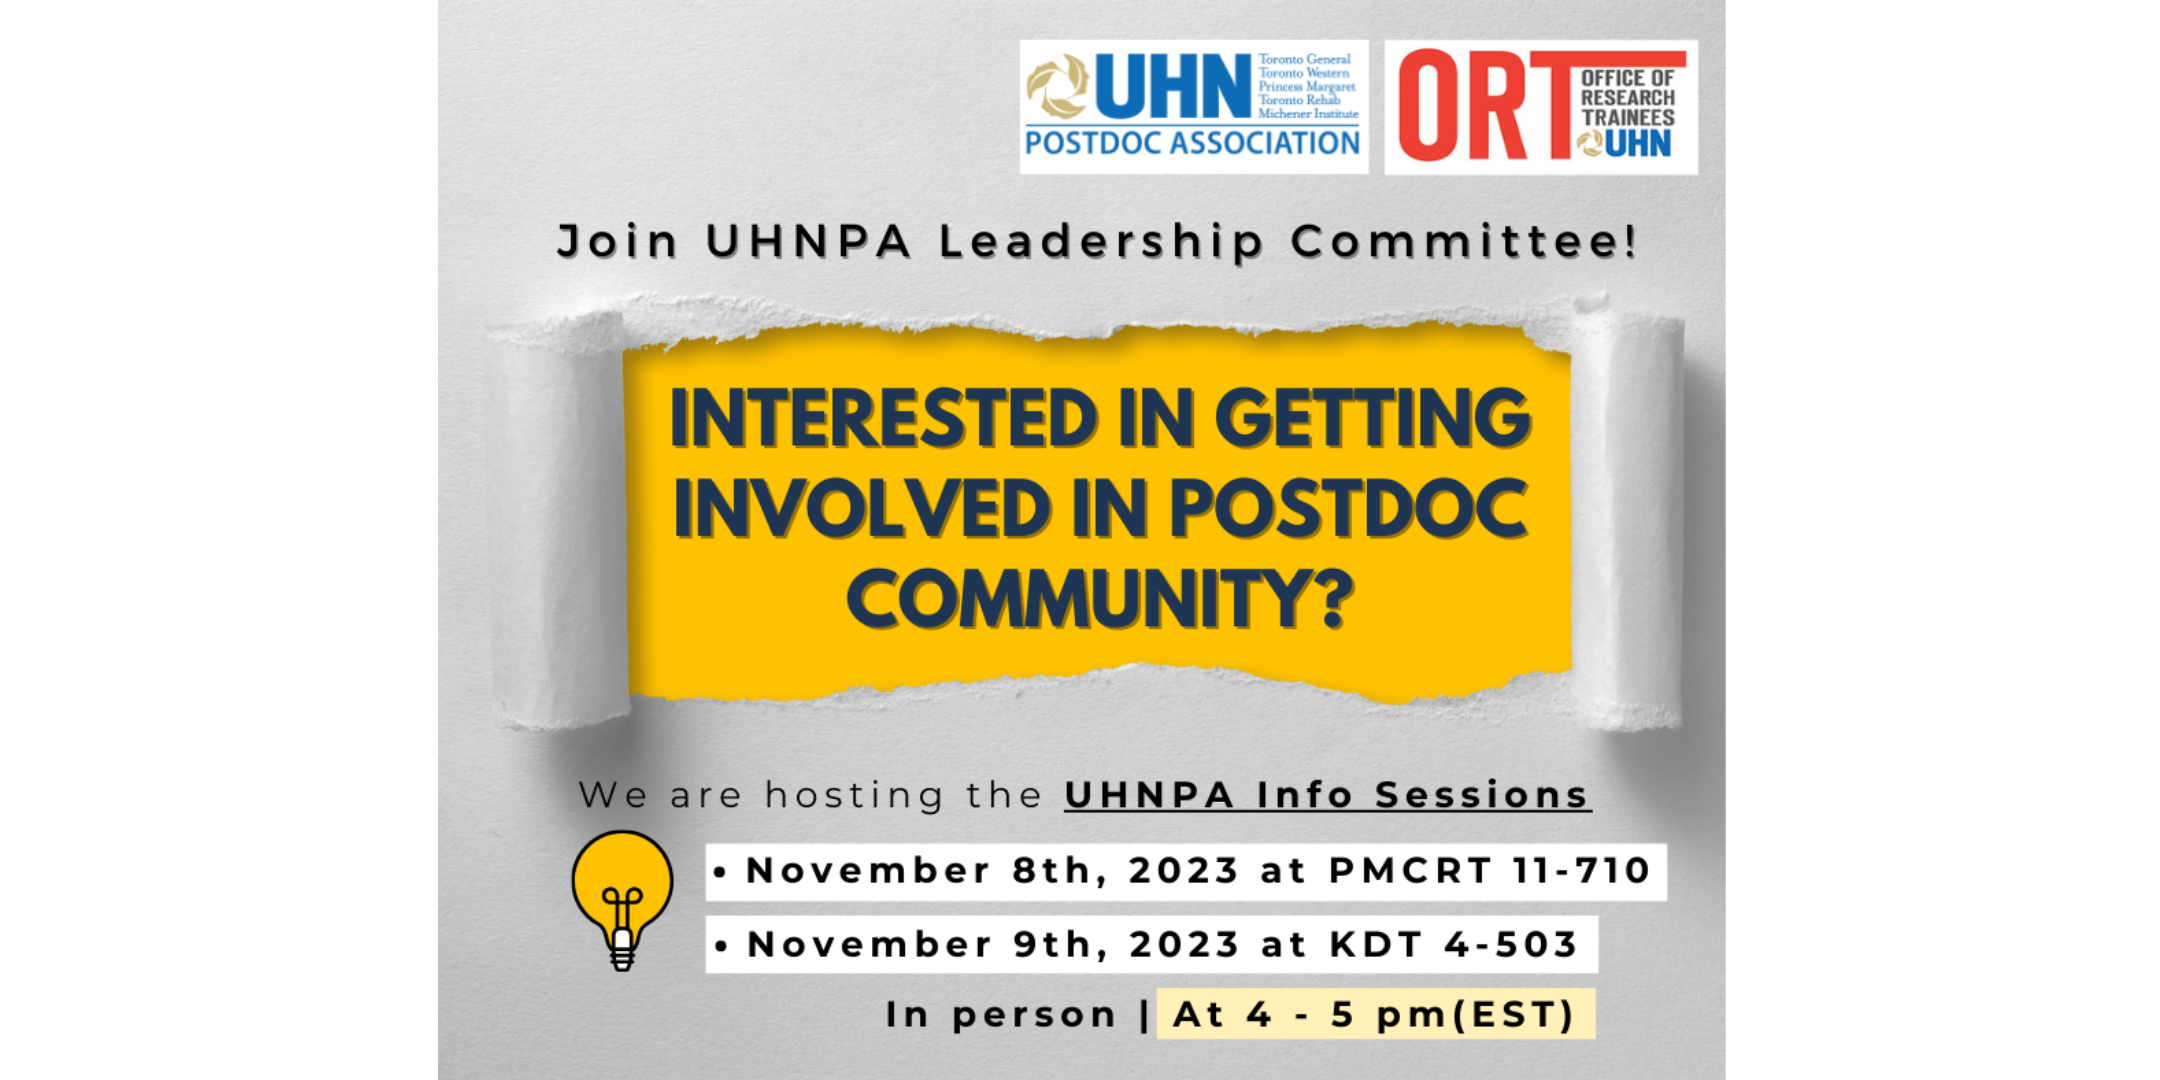 Join UHNPA Leadership Committee. Interested in Getting involved in postdoc community? We are hosting the UHNPA Info Sessions. November 8t, 2023, at PMCRT 11-710. November 9th, 2023 at KDT 6-5-5. In person. At 4-5 pm (EST)